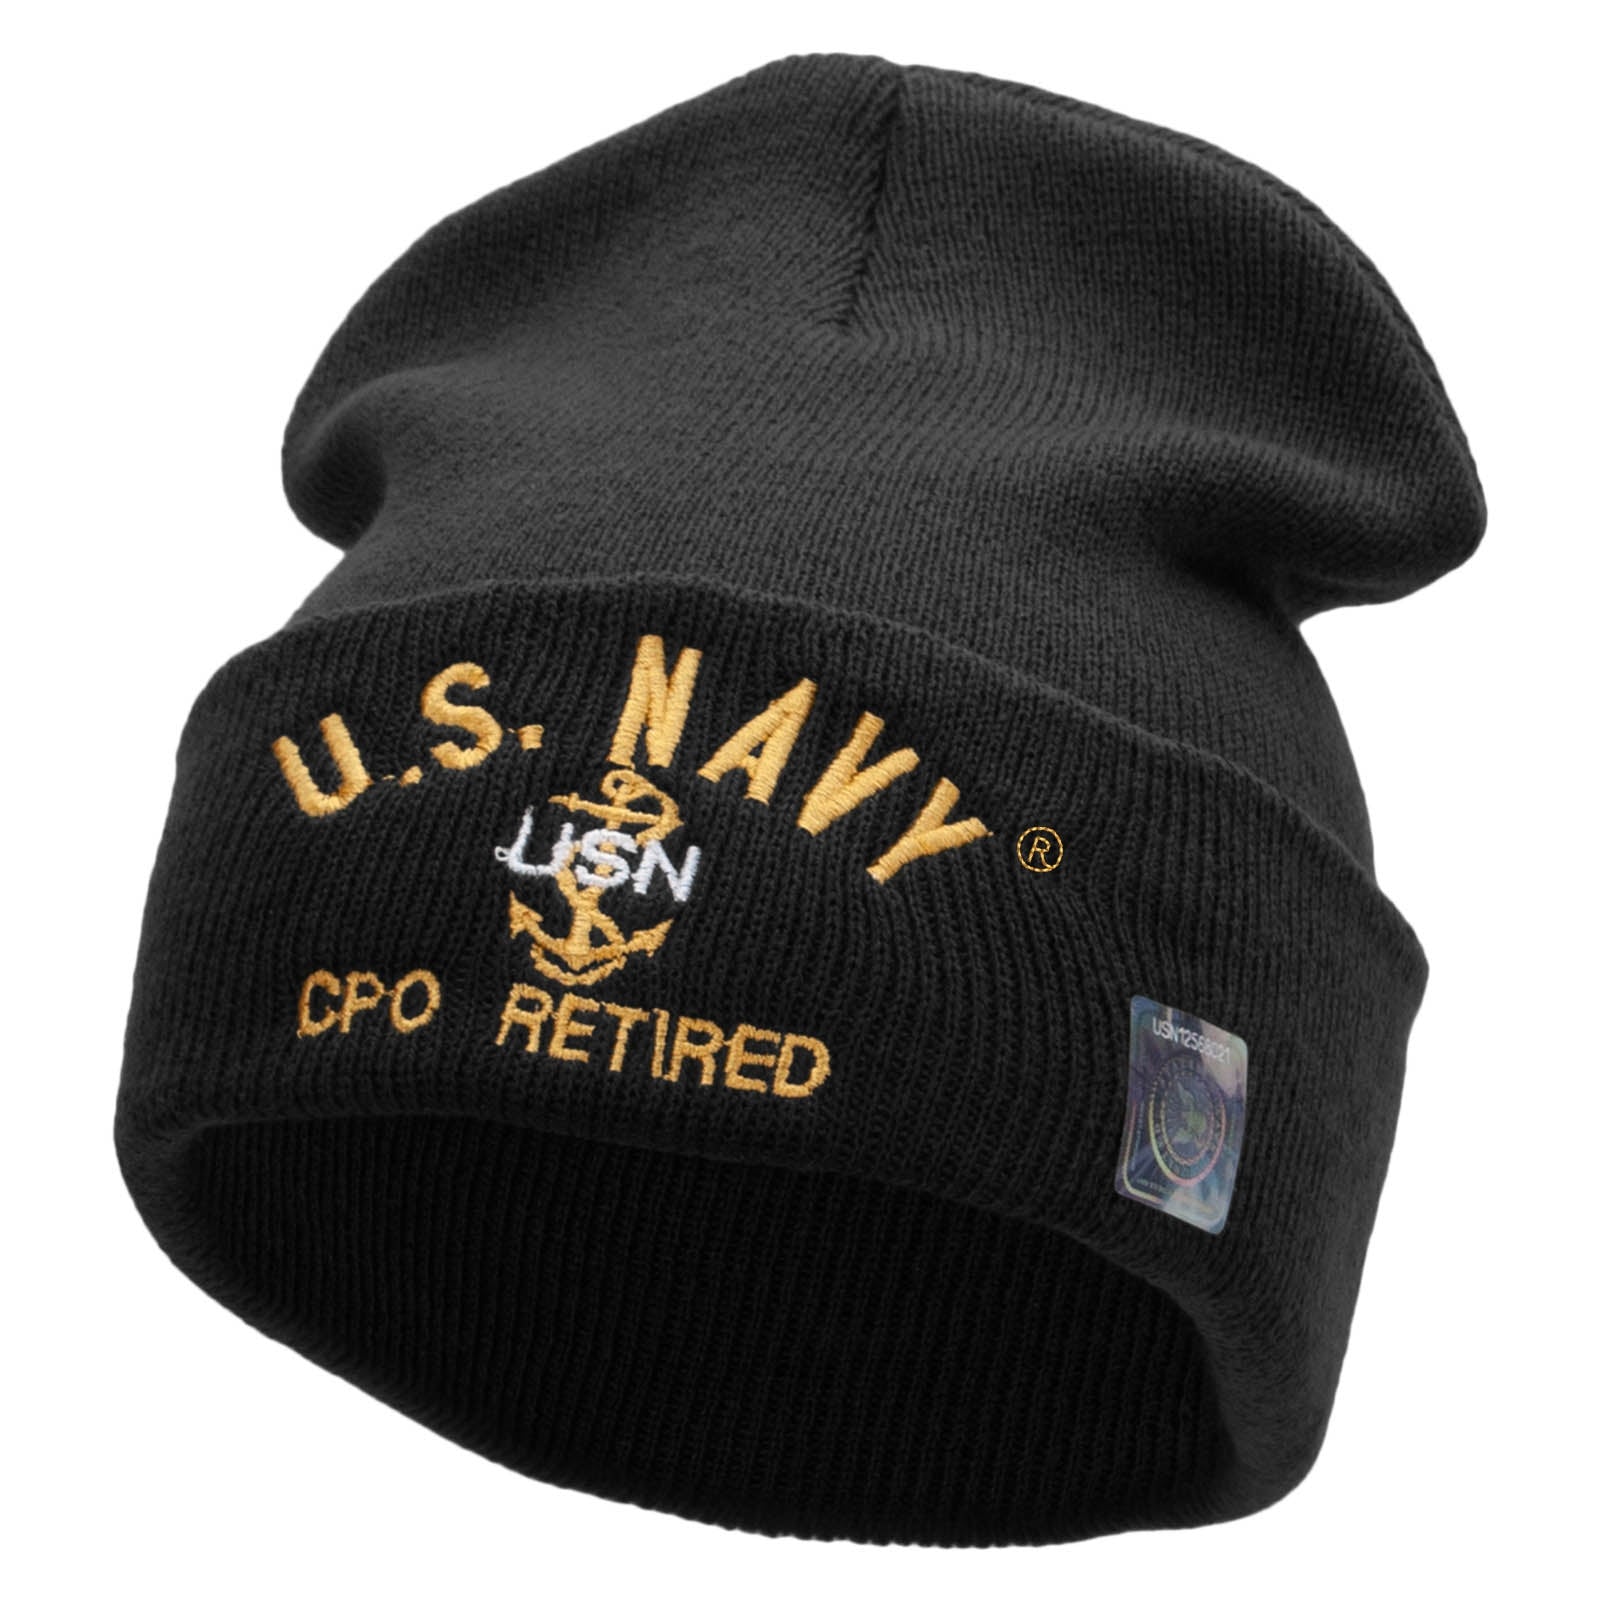 Licensed US Navy CPO Retired Military Embroidered Long Beanie Made in USA - Black OSFM